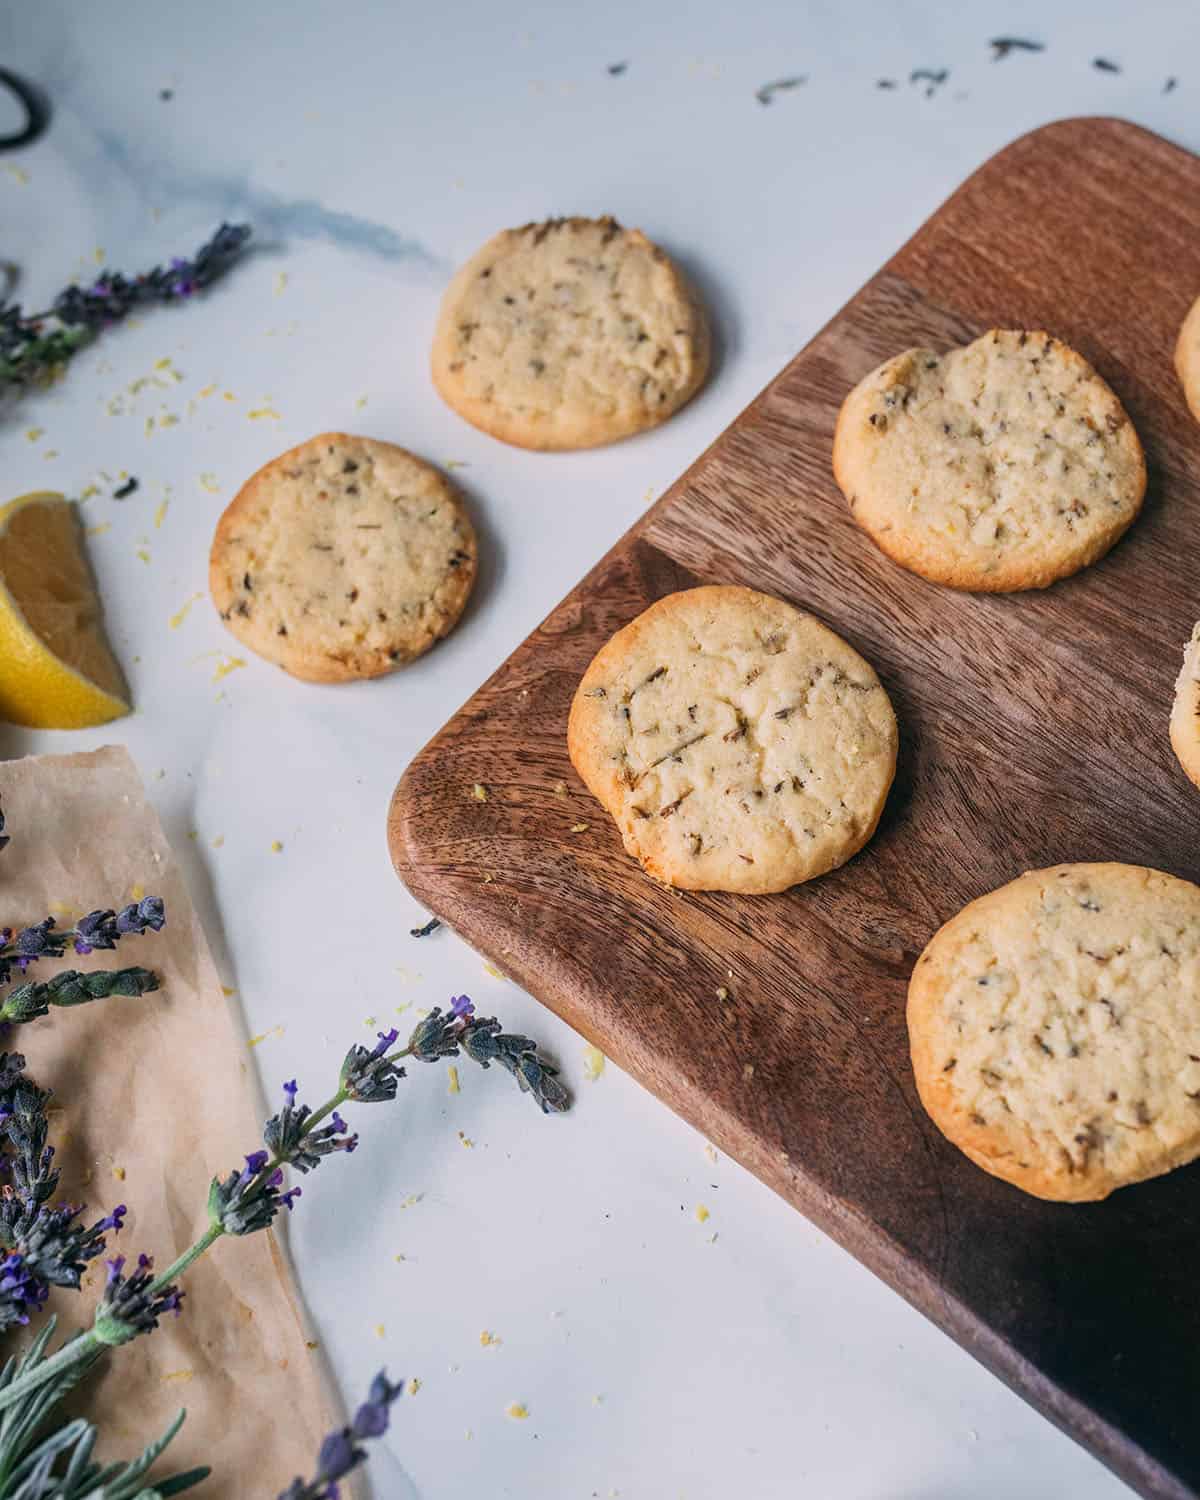 Lemon lavender cookies on a wooden cutting board and a white countertop, showing the corner of the cutting board. Surrounded by fresh lavender and lemon slices.